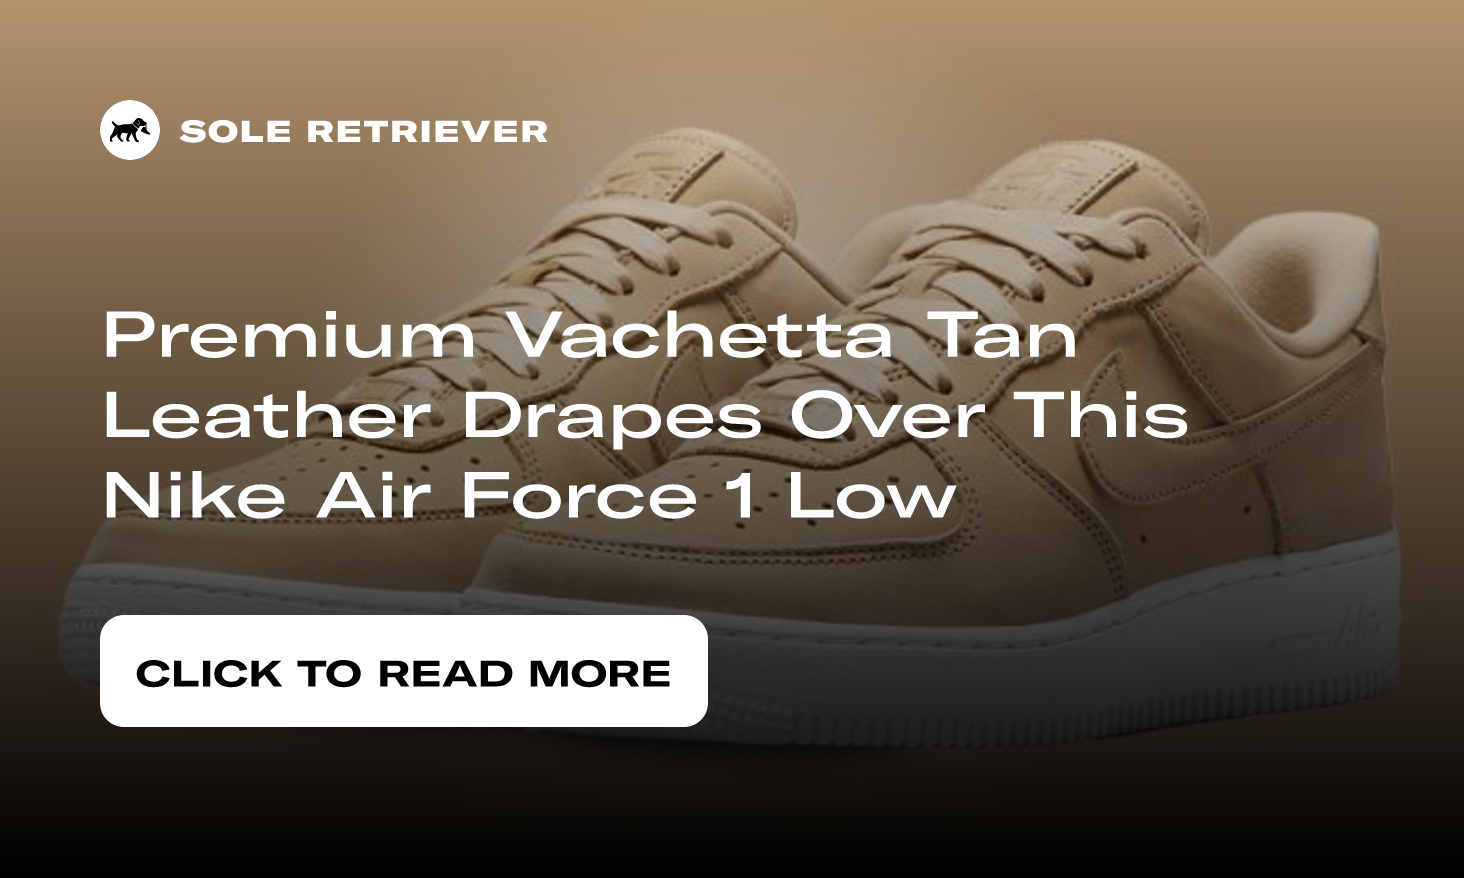 Premium Vachetta Tan Leather Drapes Over This Nike Air Force 1 Low -  Sneaker News